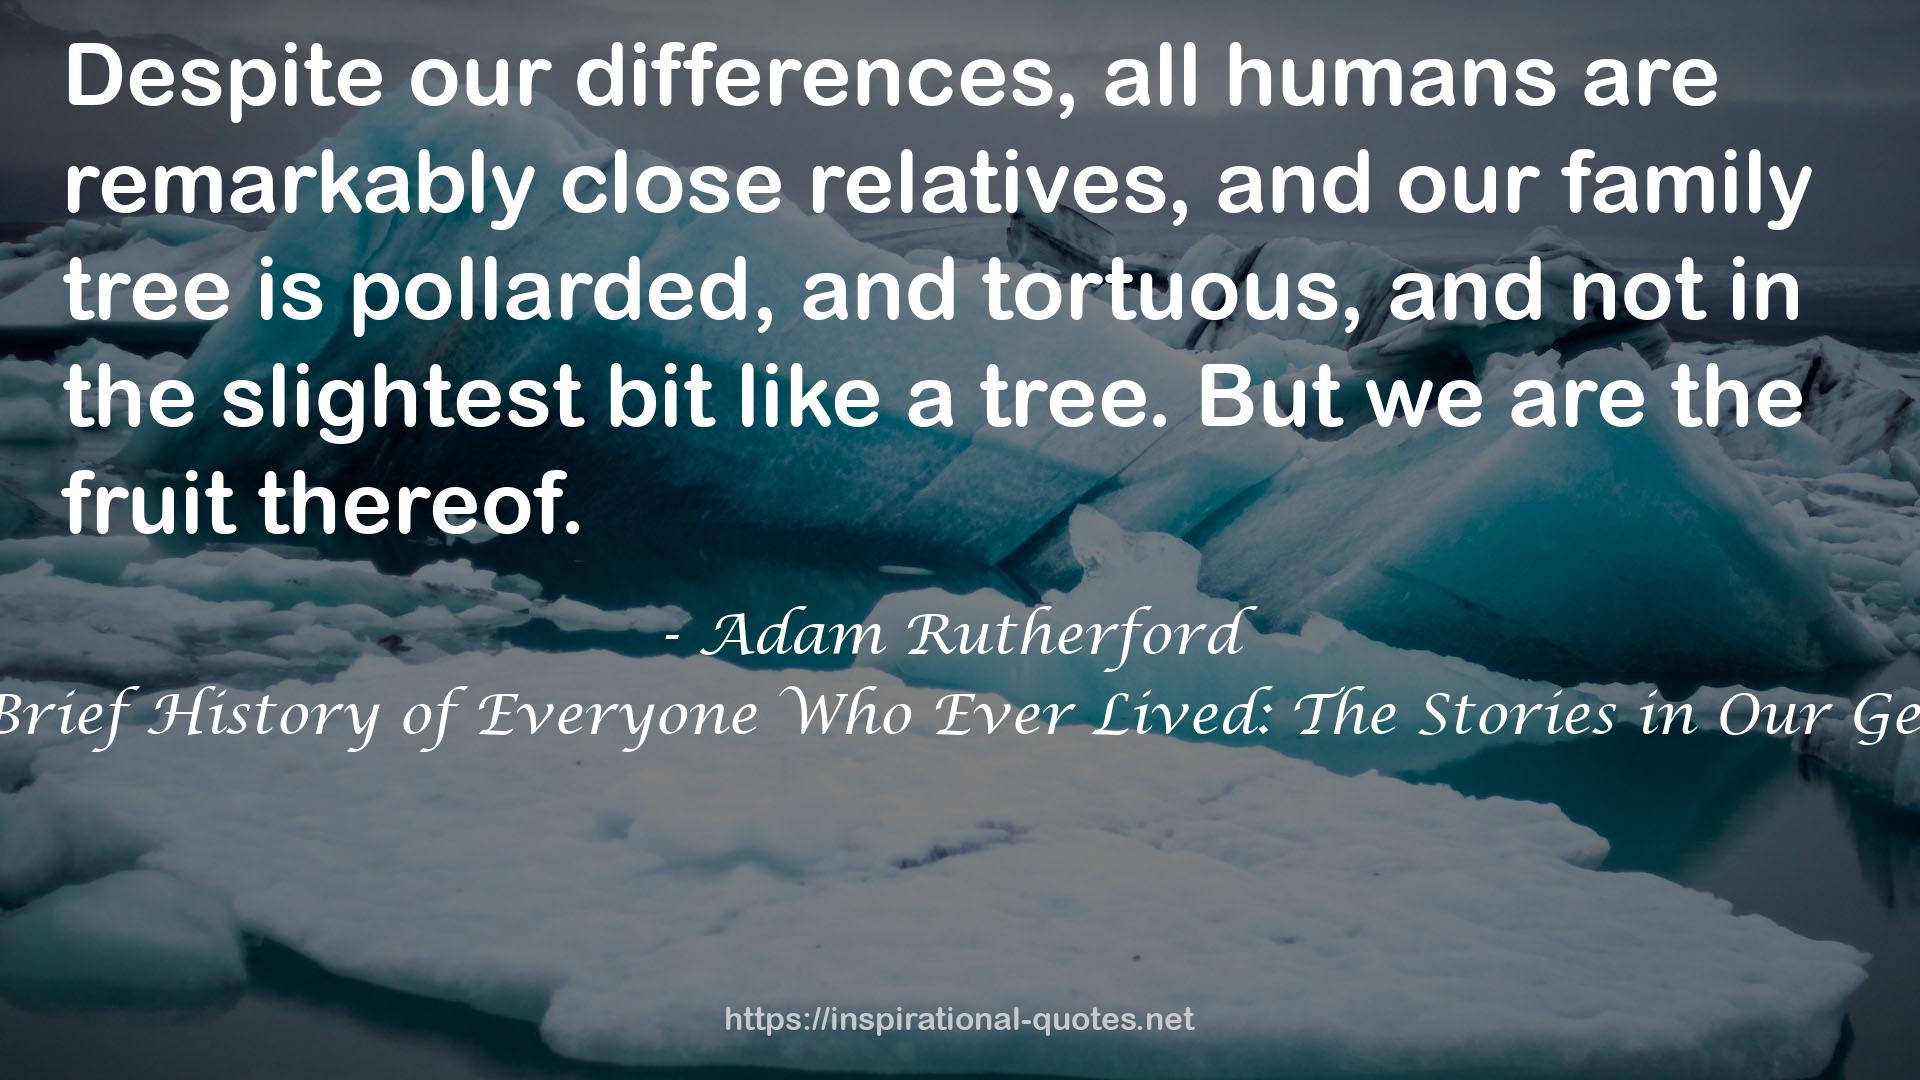 A Brief History of Everyone Who Ever Lived: The Stories in Our Genes QUOTES